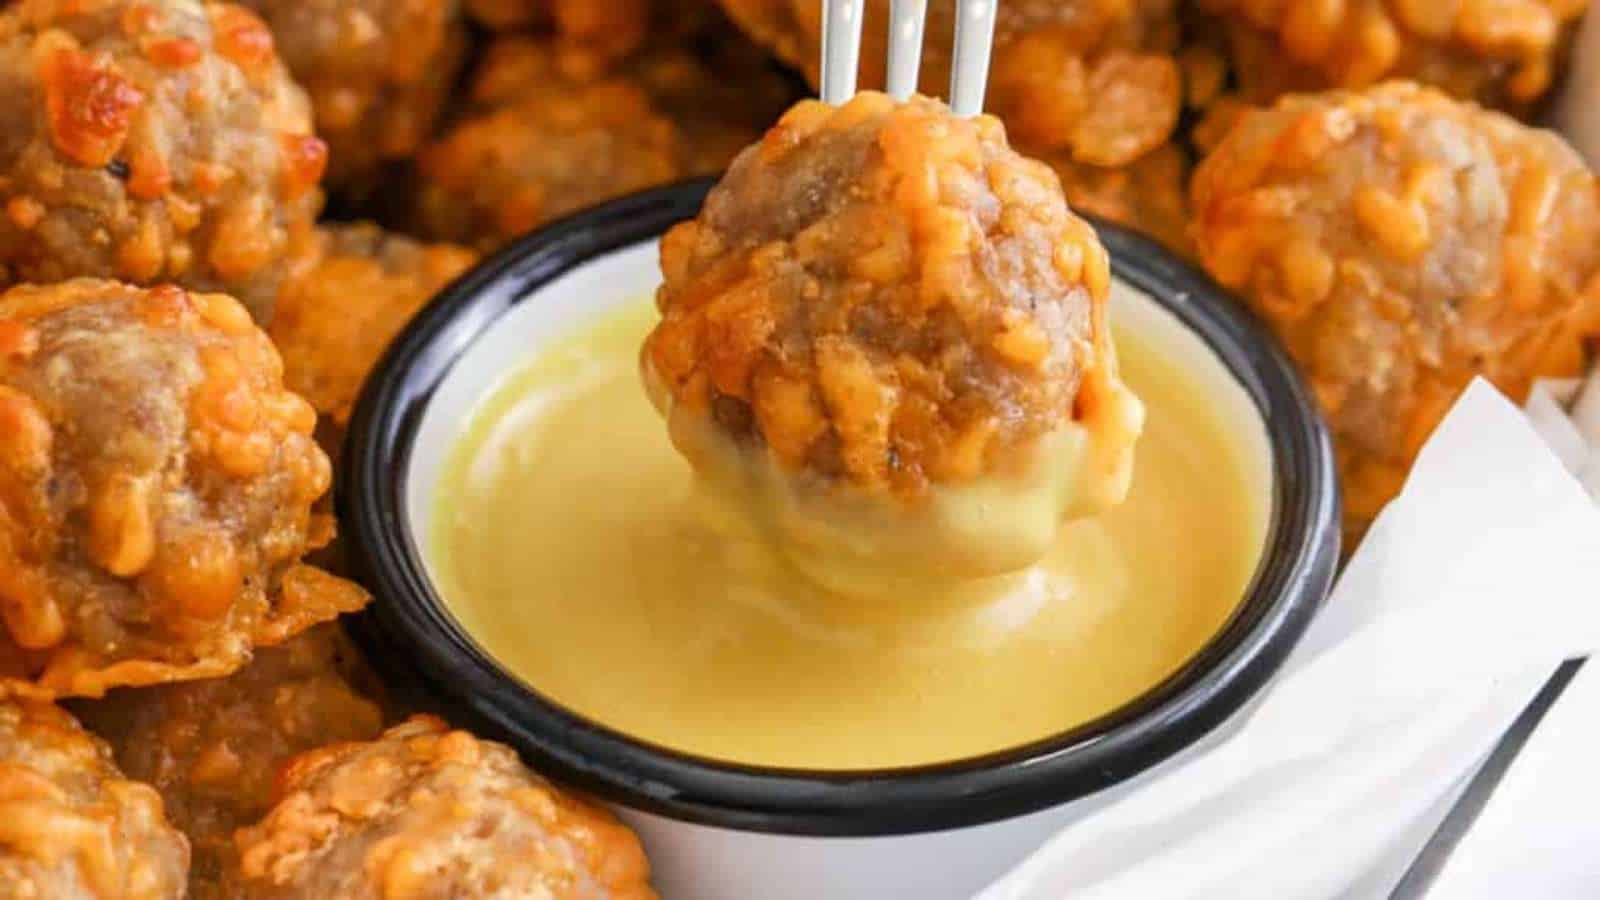 Cheesy meatballs being dipped in a sauce.